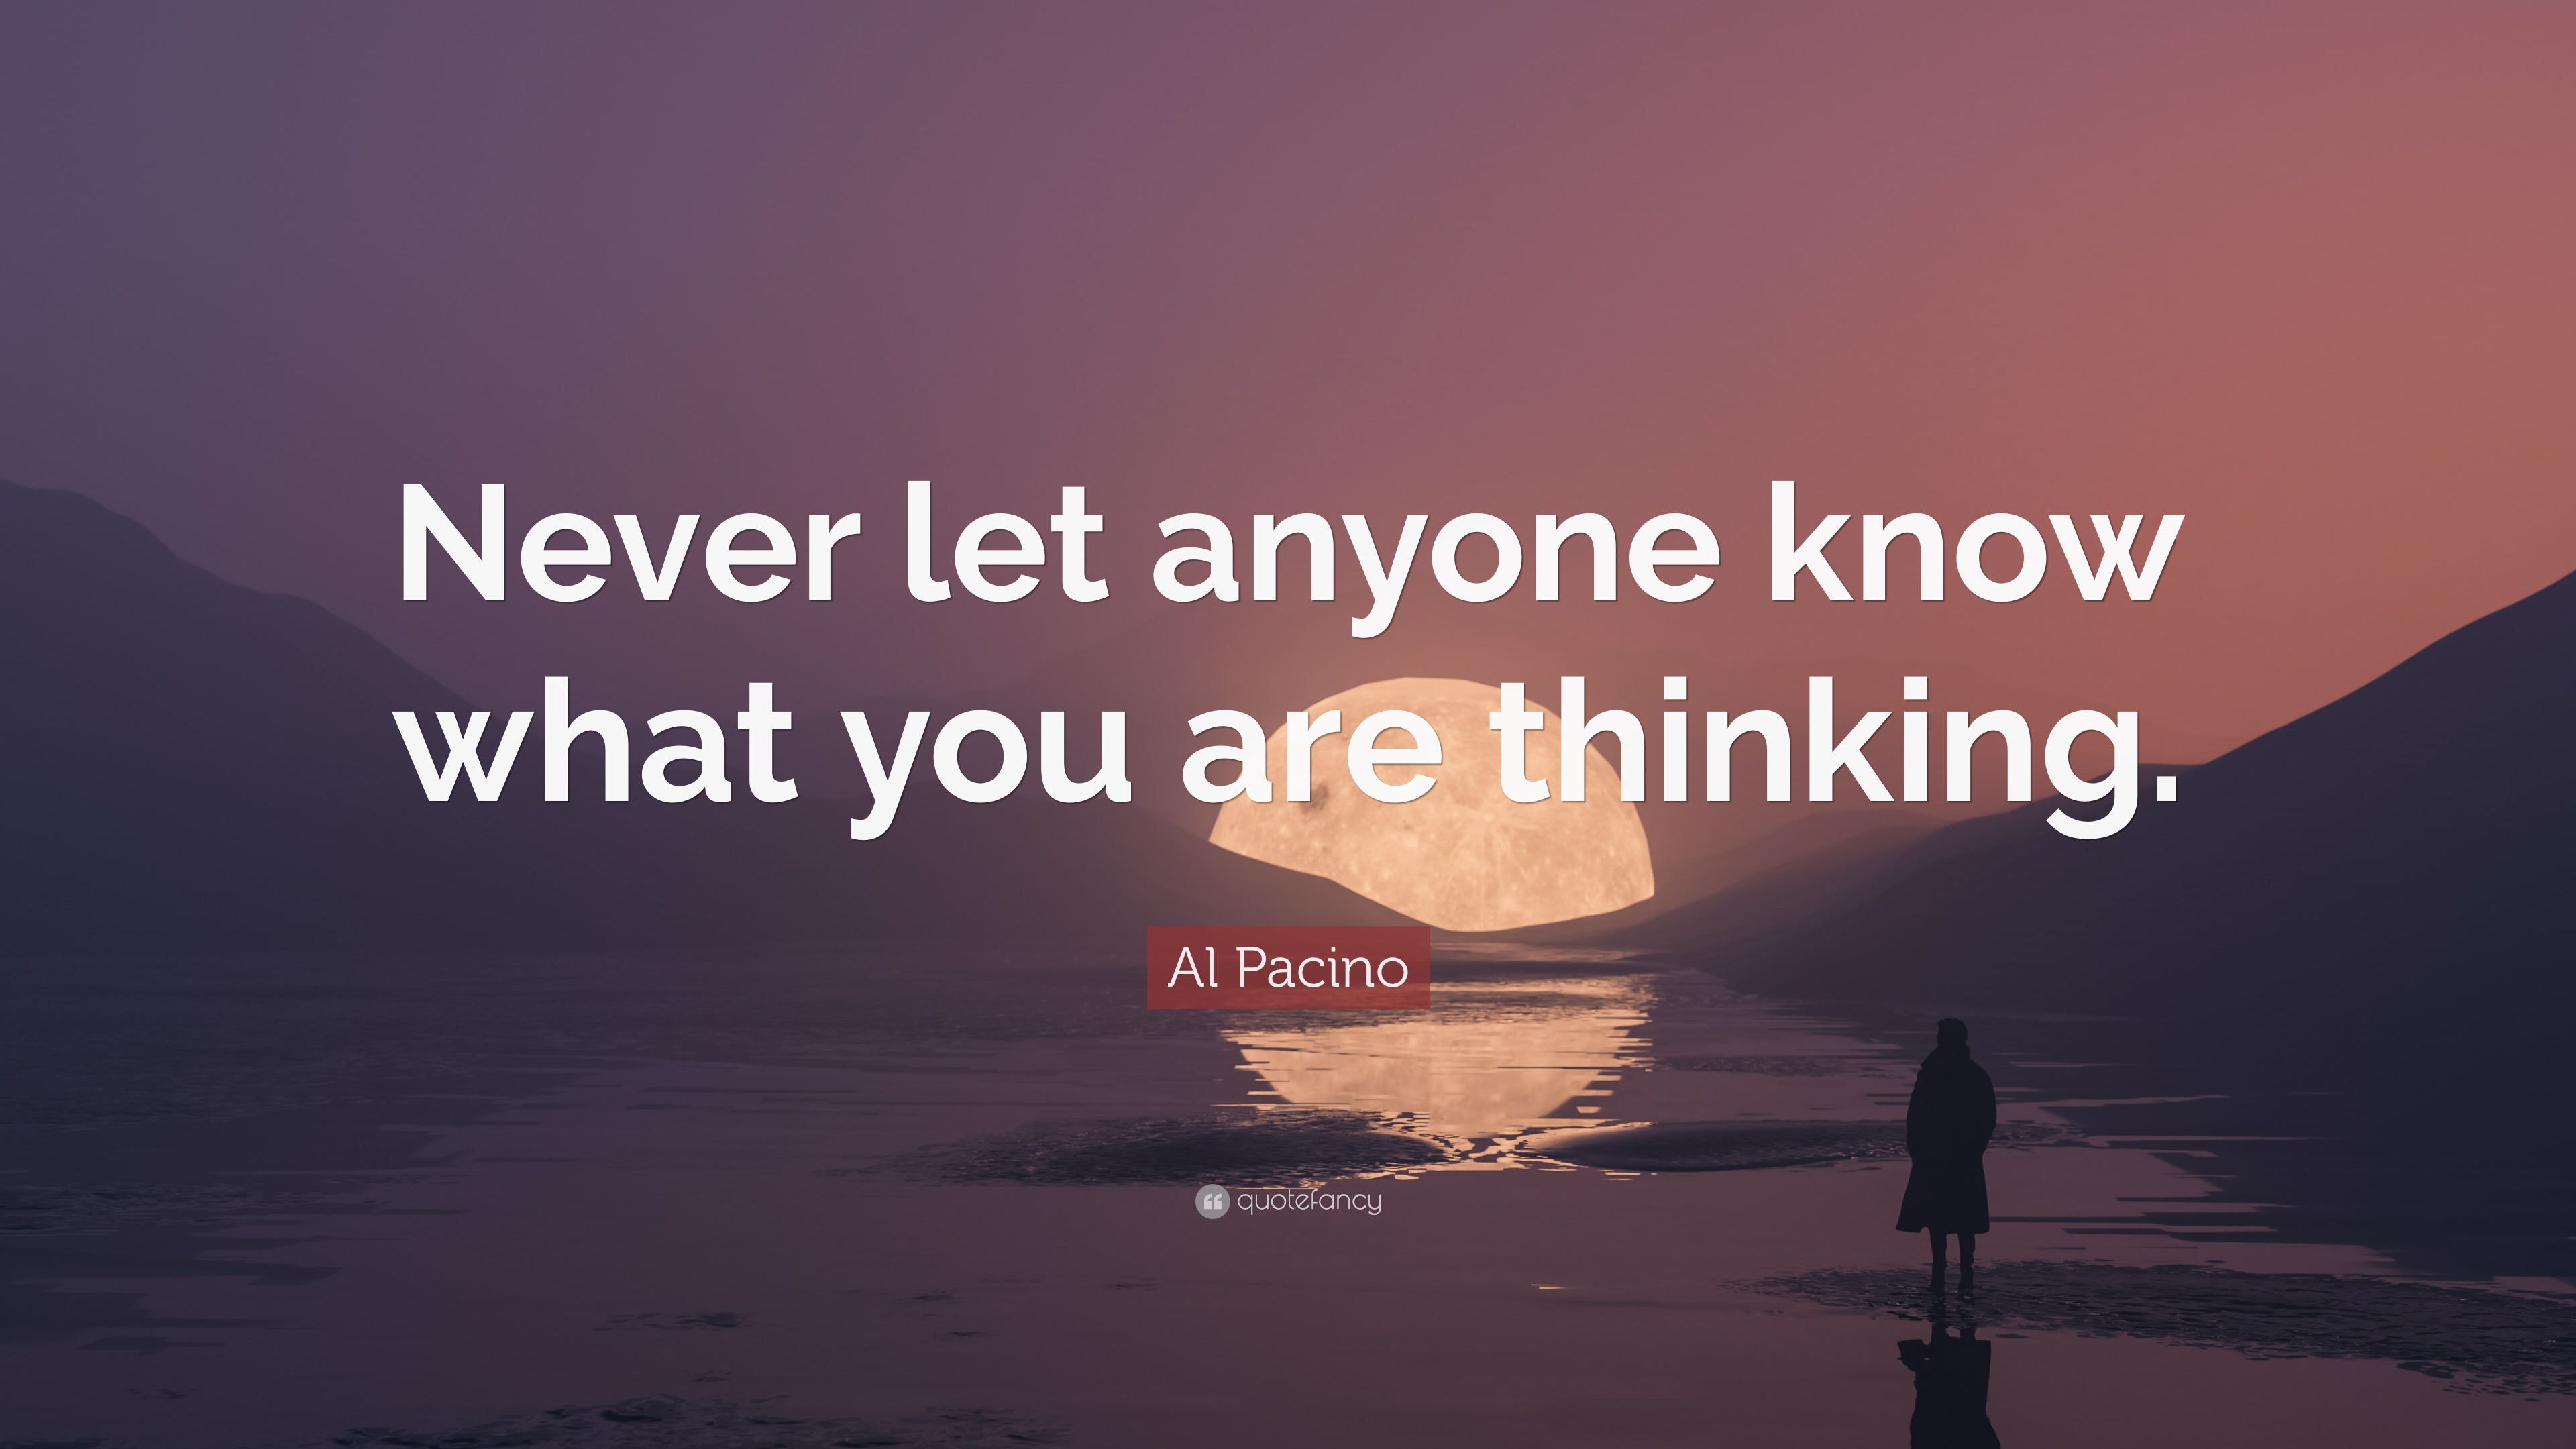 Al Pacino Quote: “Never let anyone know what you are thinking.”